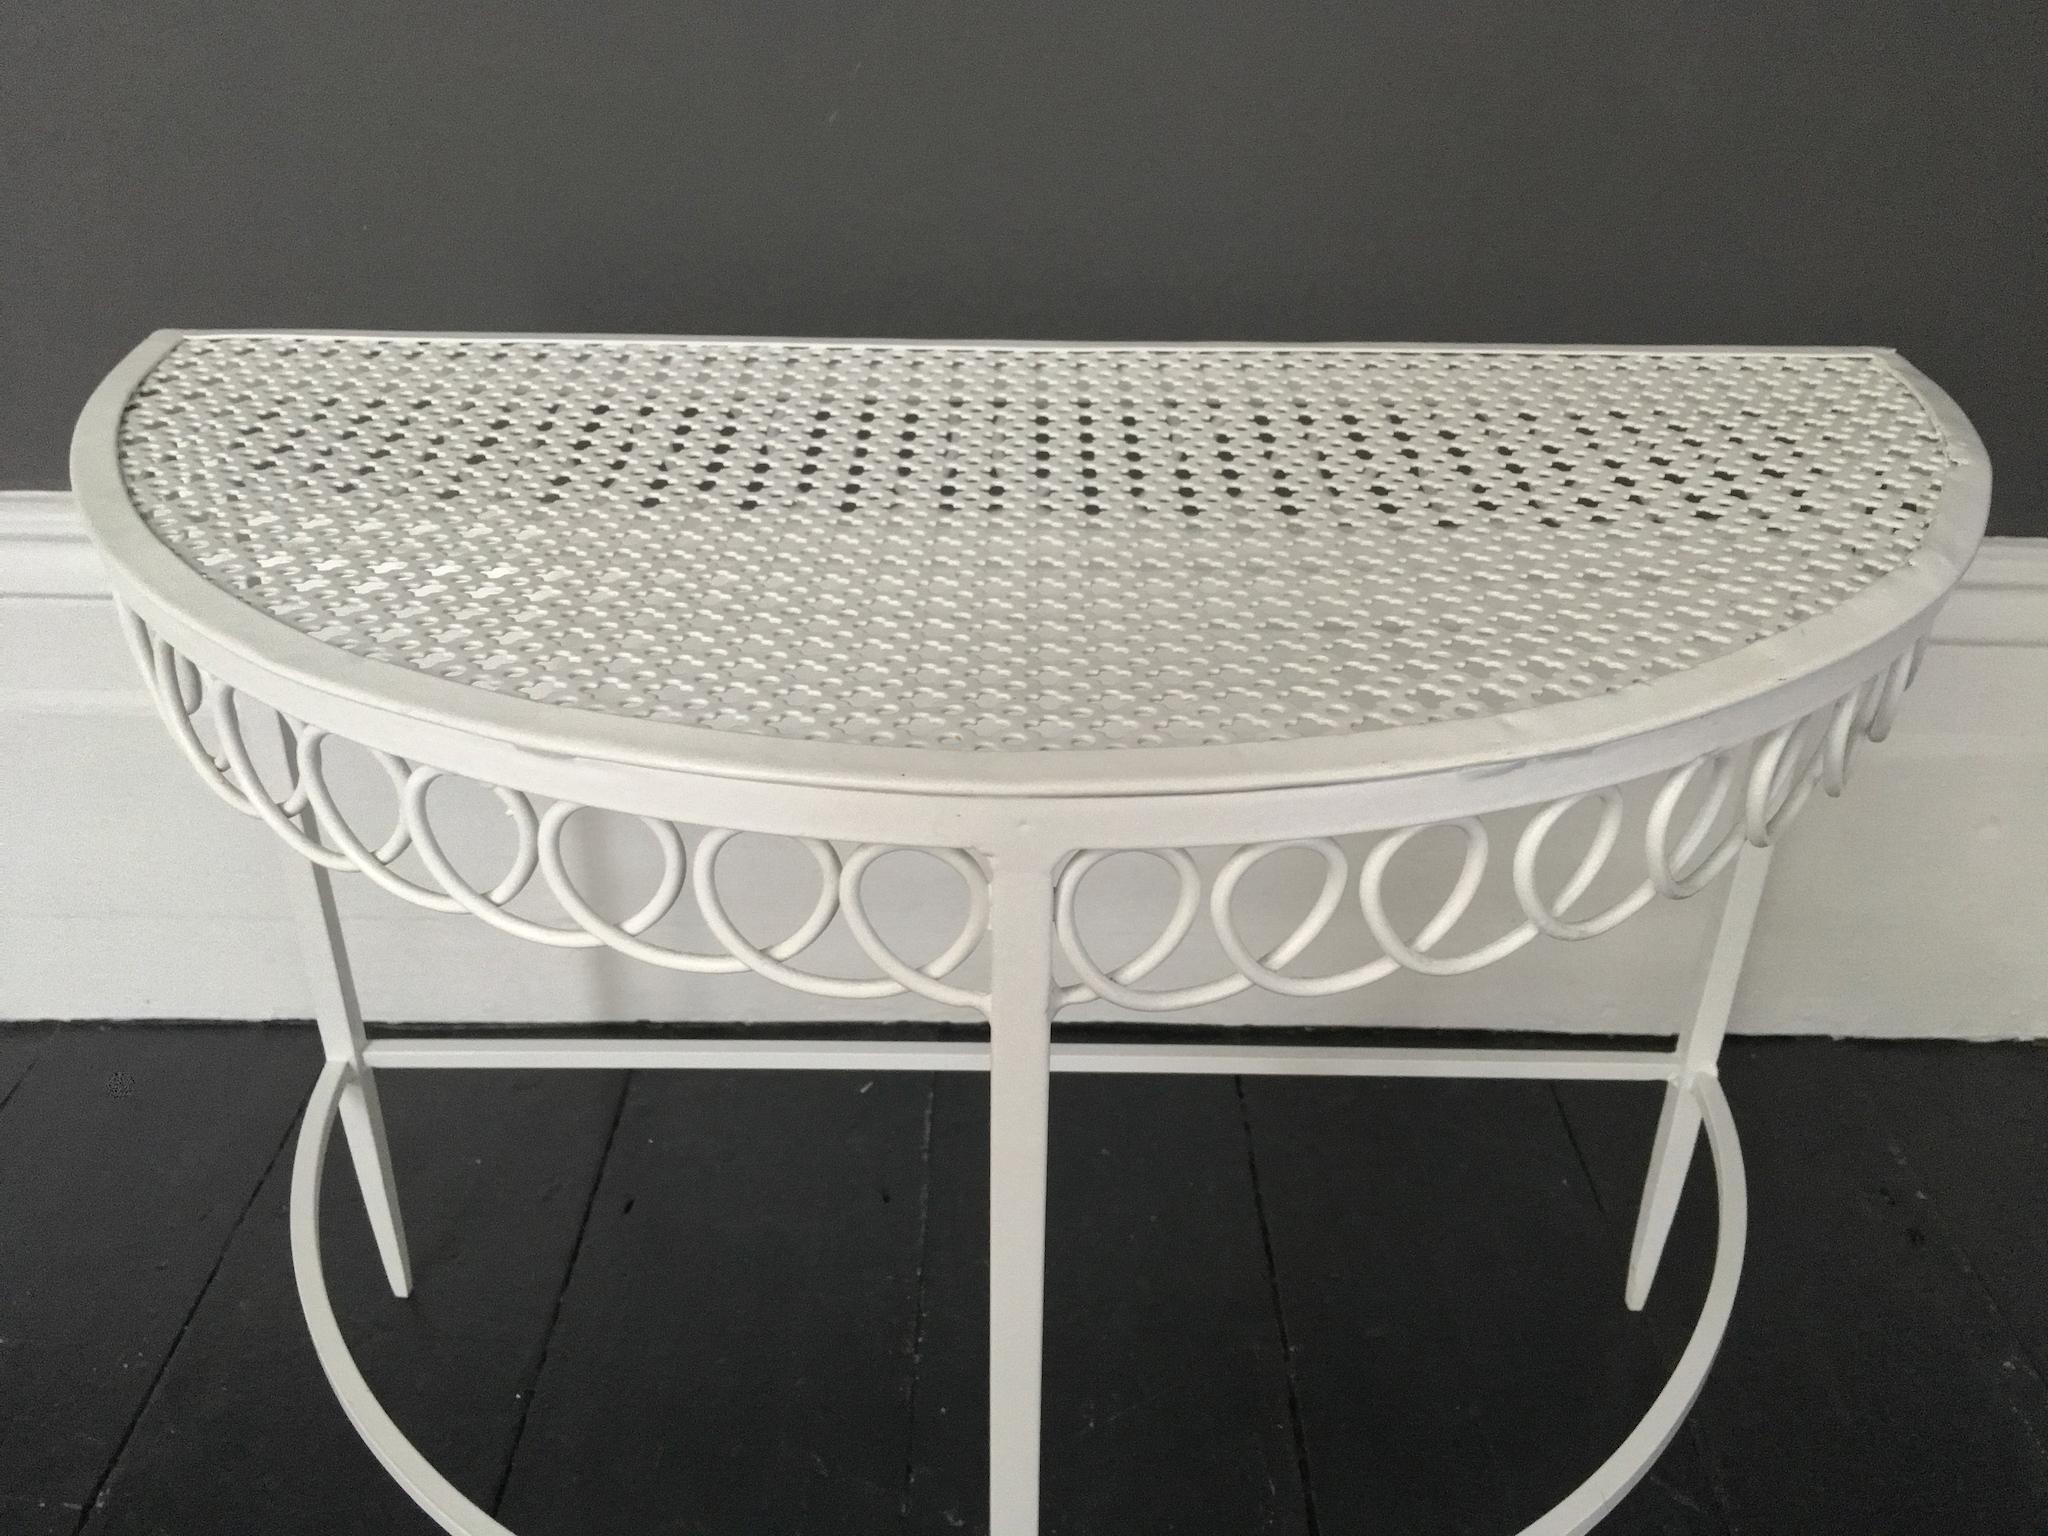 Cut Steel Pair of Demilune Metal Tables in White by Matégot, Mid-20th Century France